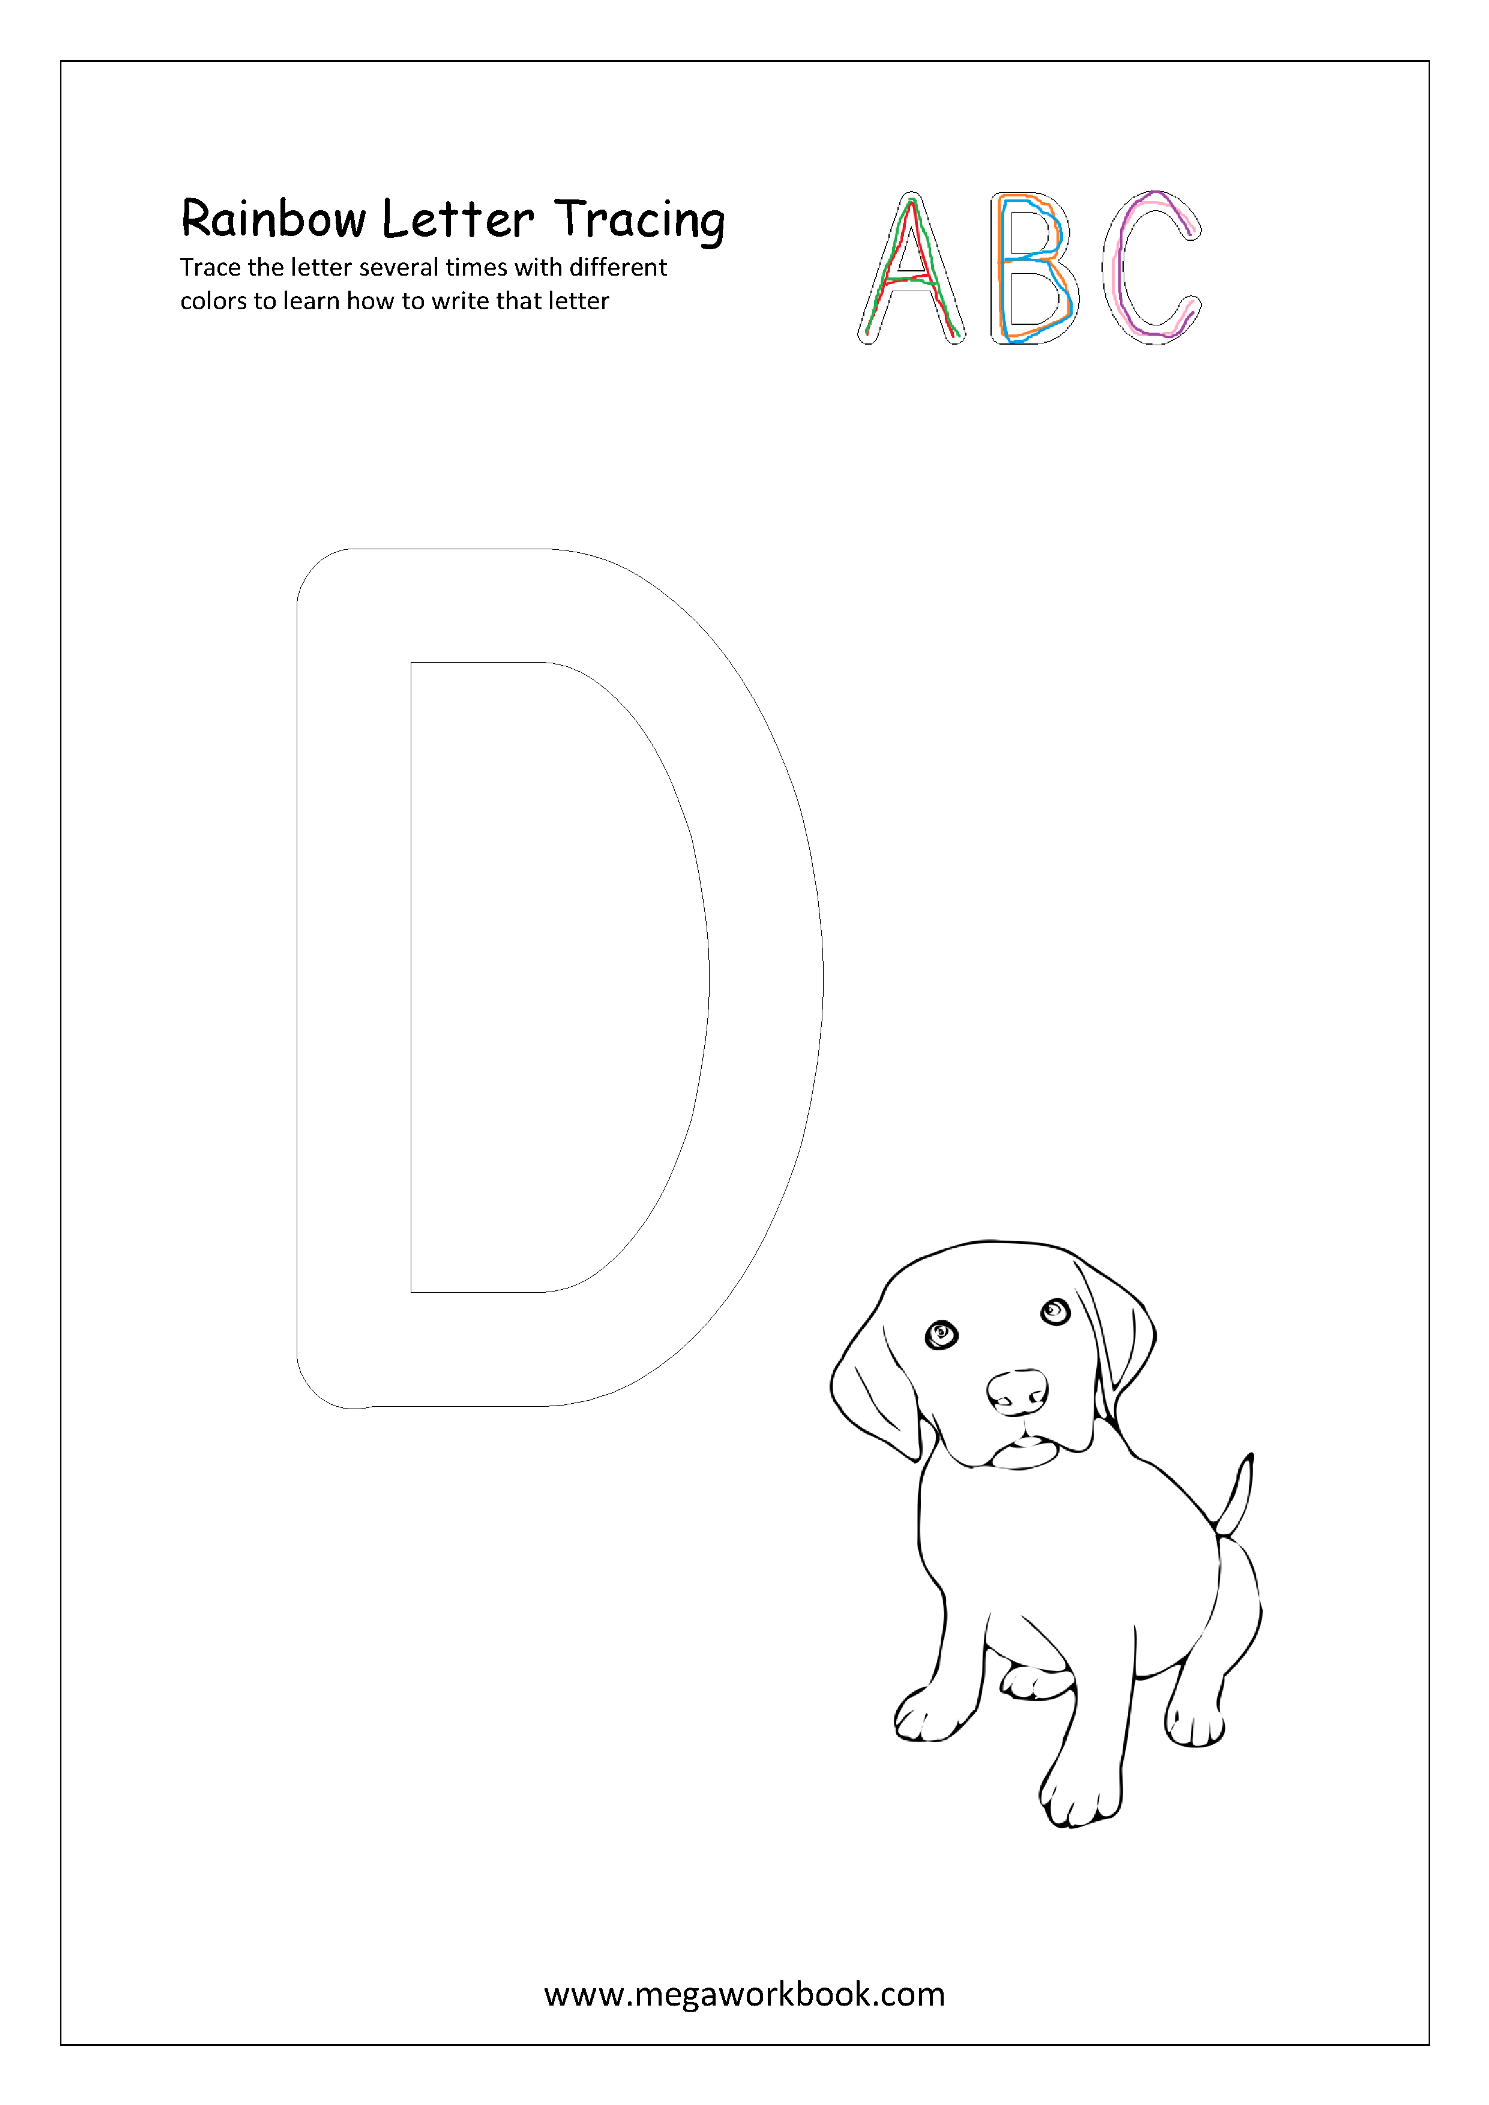 Free Printable Rainbow Writing Worksheets - Rainbow Letter Tracing